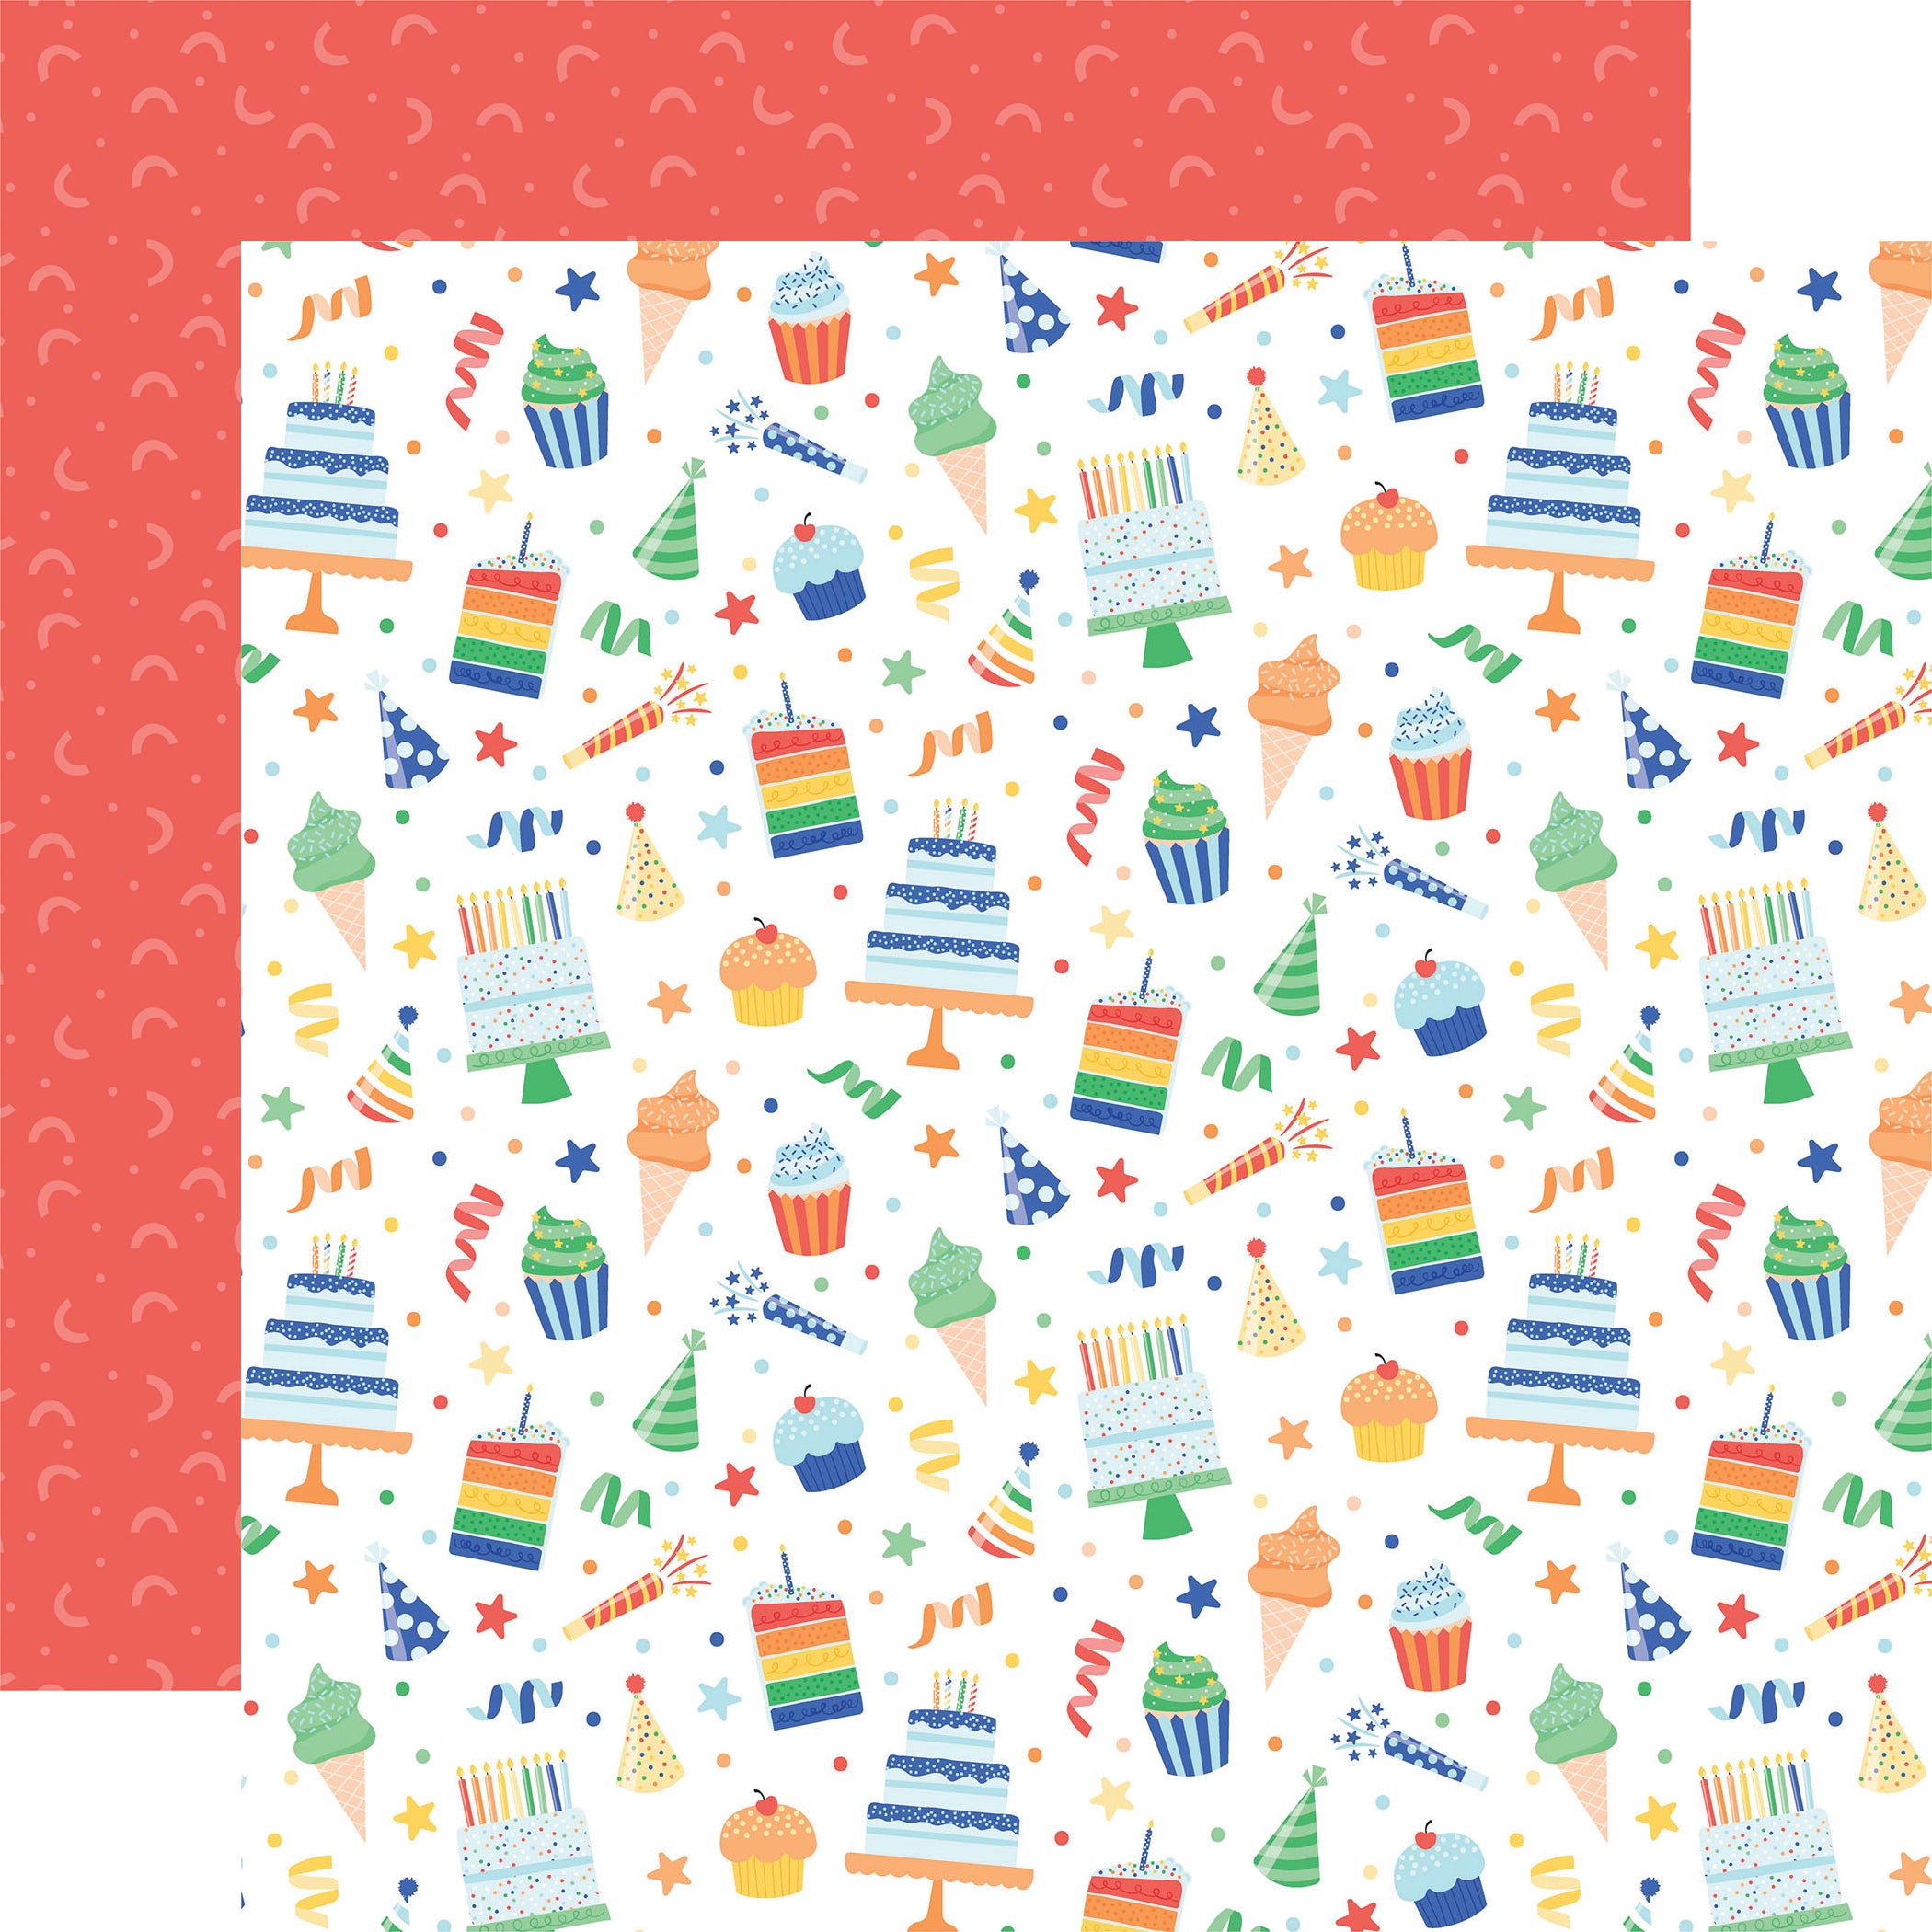 Make a Wish Birthday Boy Collection Birthday Wish Treats 12 x 12 Double-Sided Scrapbook Paper by Echo Park Paper